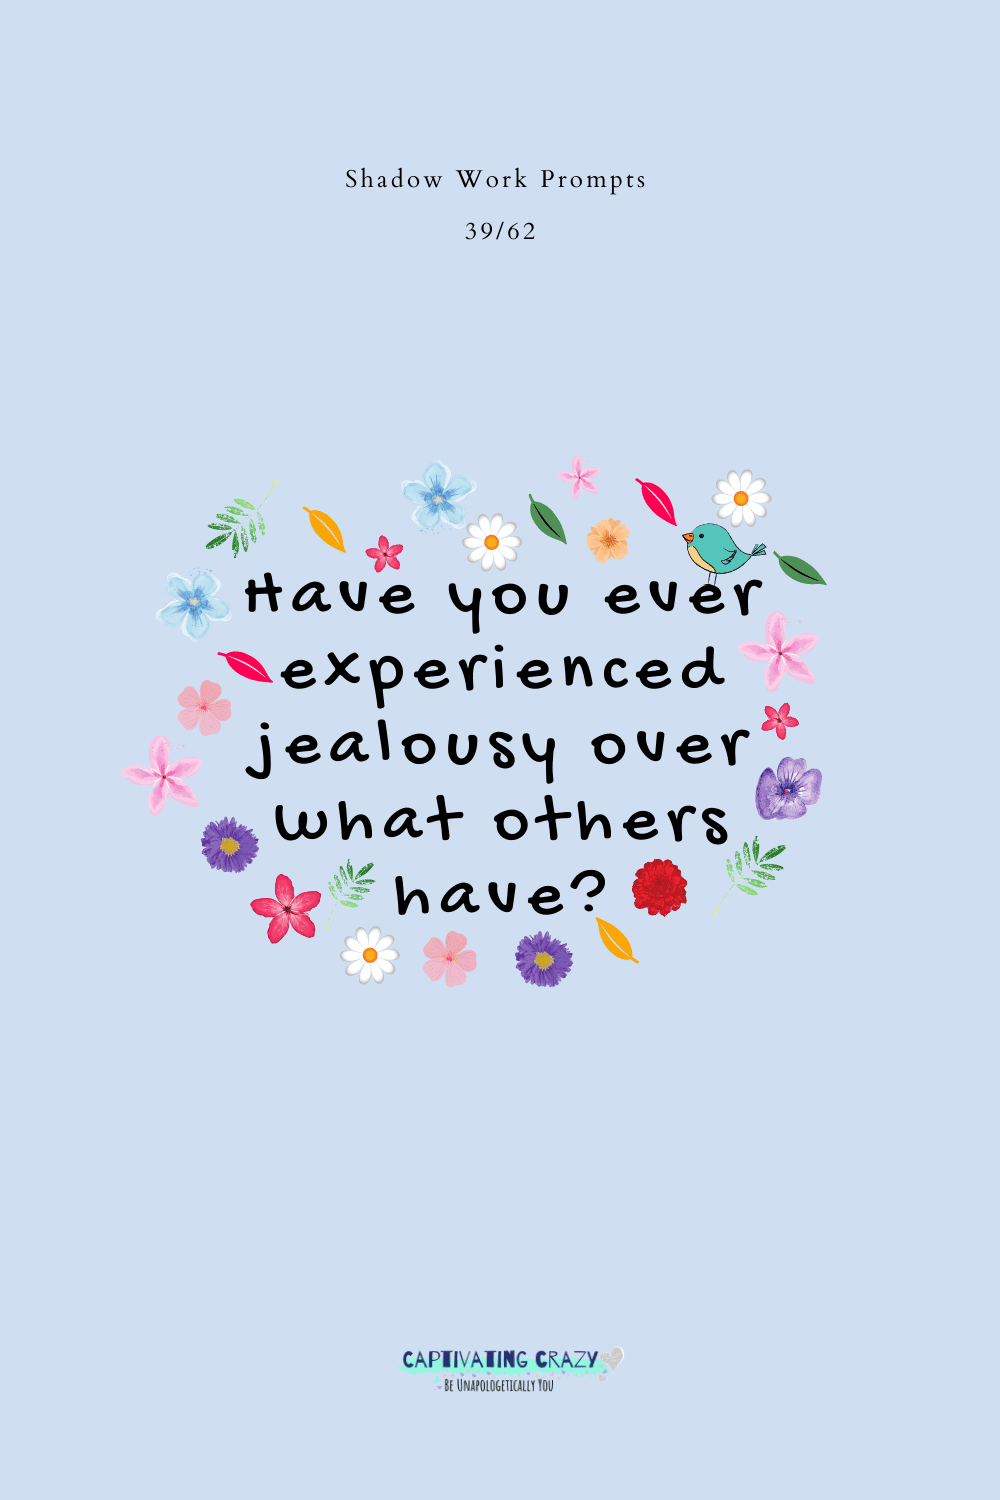 Have you ever experienced jealousy over what others have?